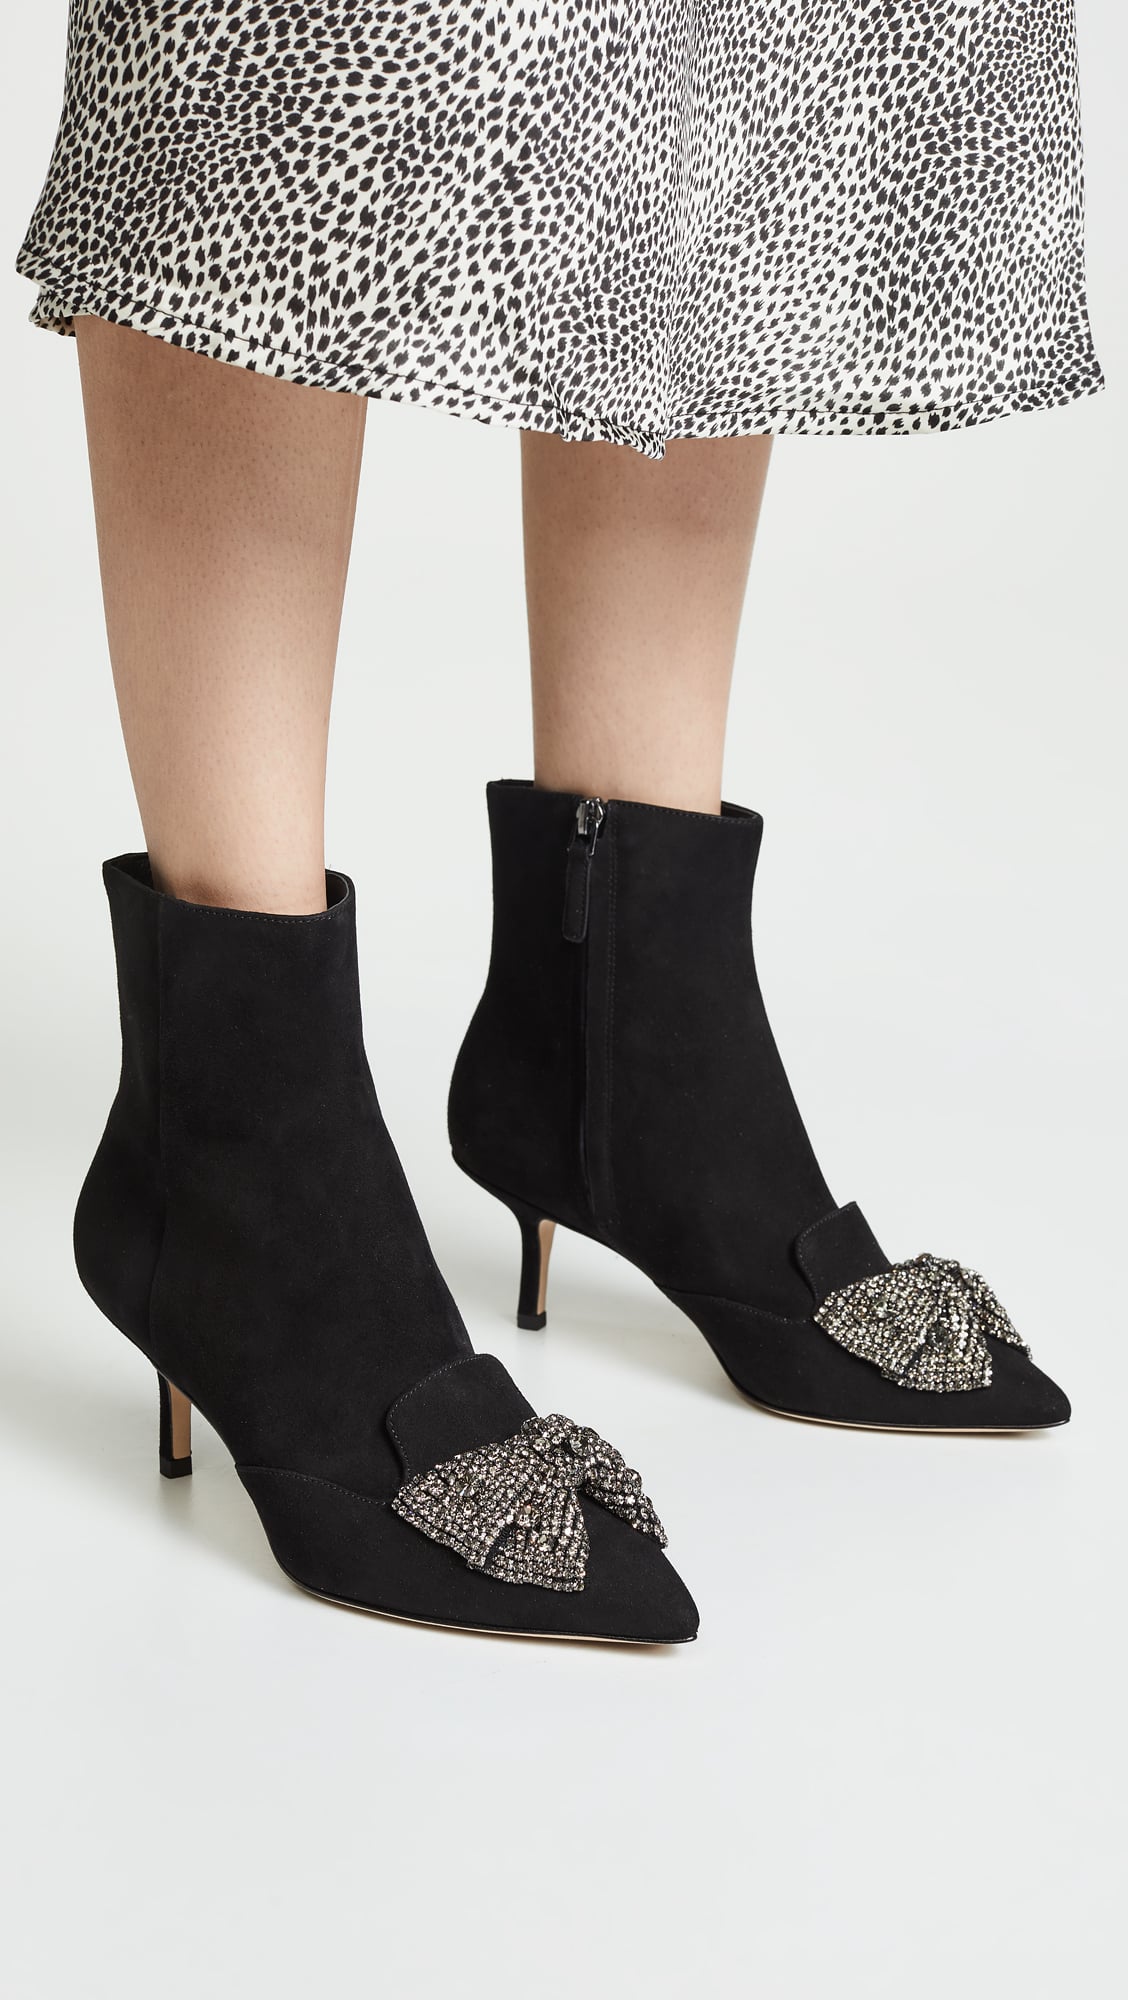 Tory Burch Esme 65mm Booties Scarlett Johansson Just Made Sure My Sock  Booties Will Never Look The Same Again POPSUGAR Fashion Photo 26 |  